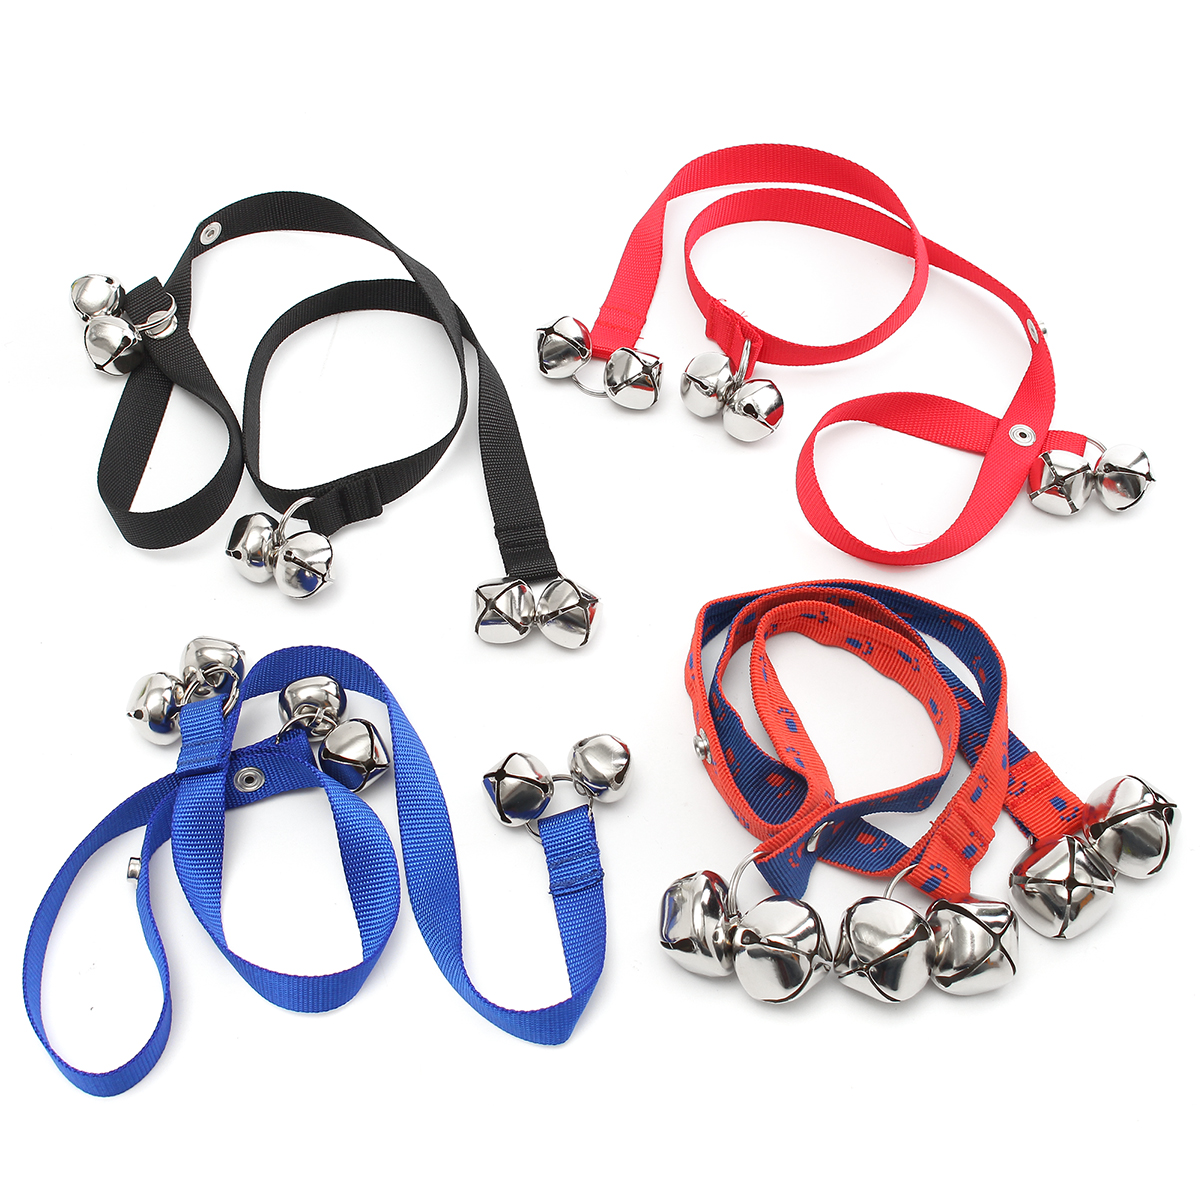 pet-supplies-dog-doorbell-rope-pet-must-have-bell-training-pendant-traction-leashes-1966425-1